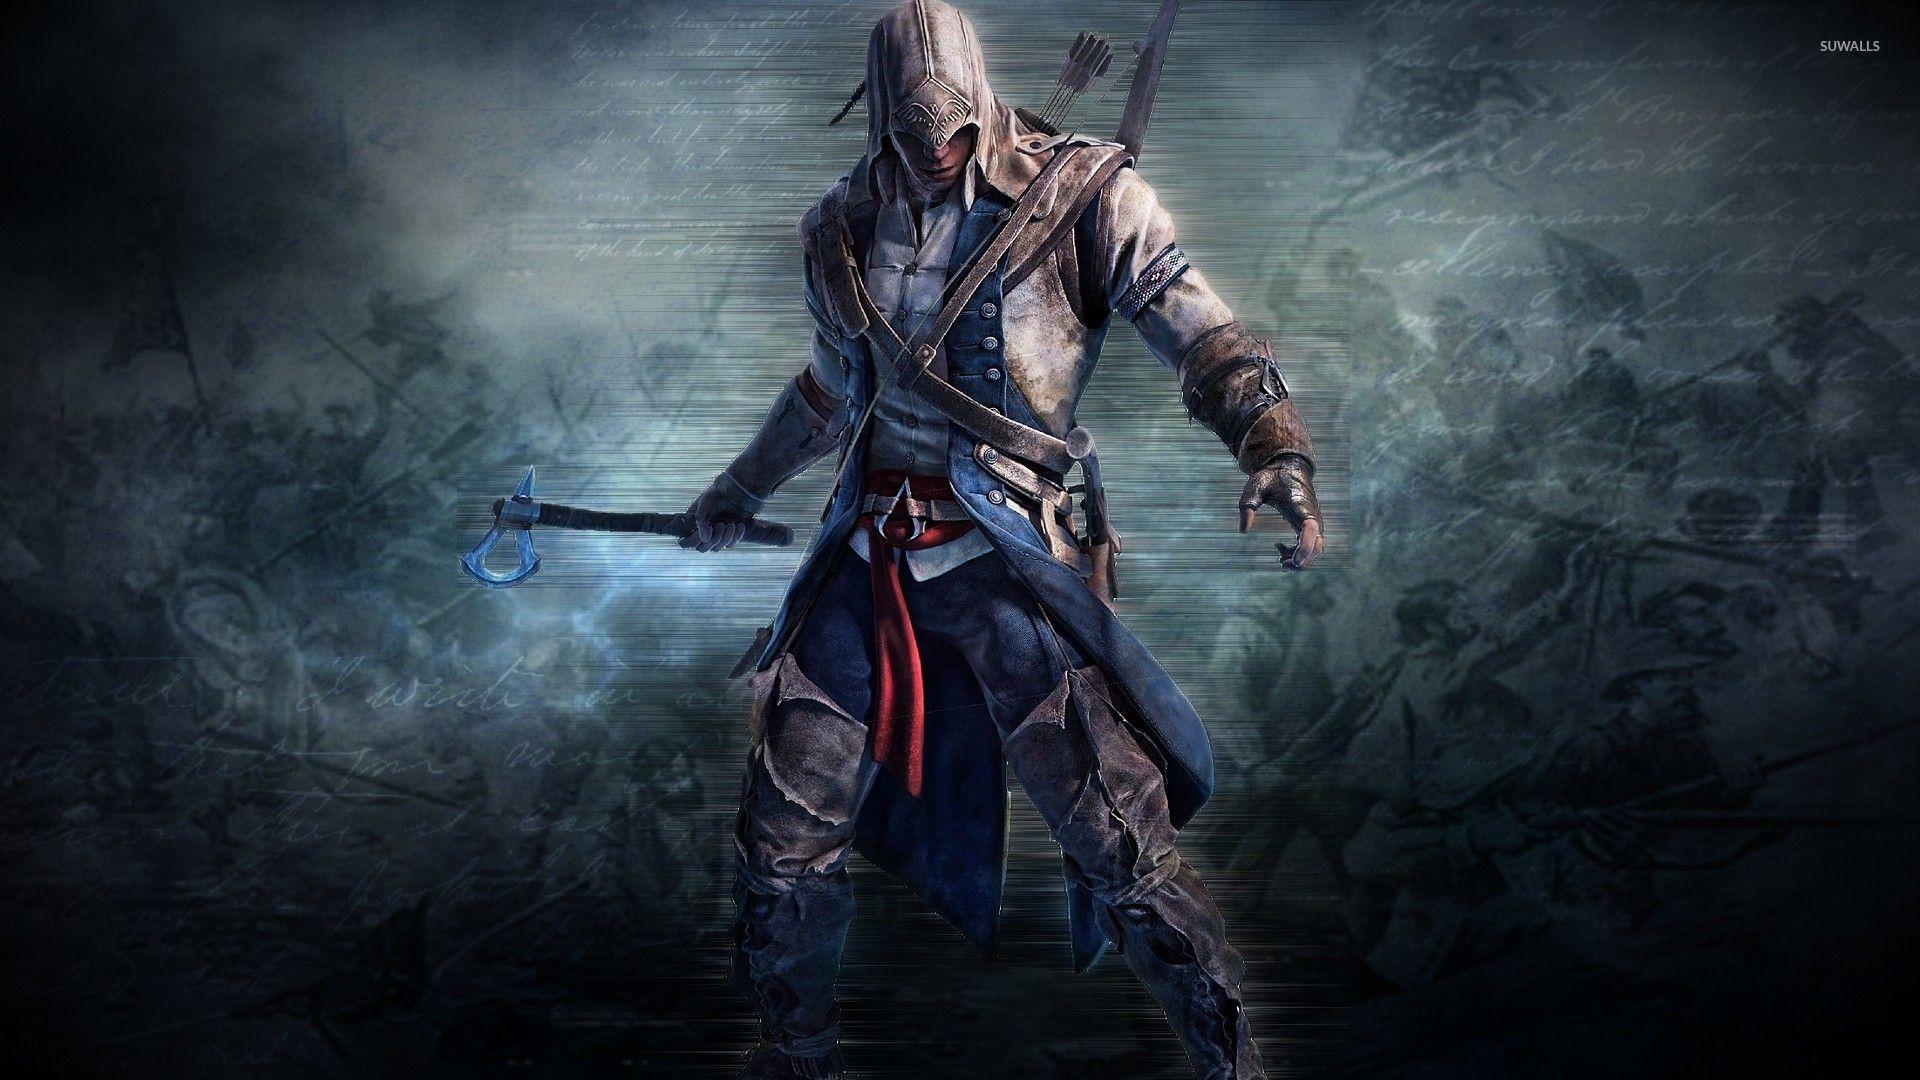 Connor Kenway with an ax's Creed III wallpaper